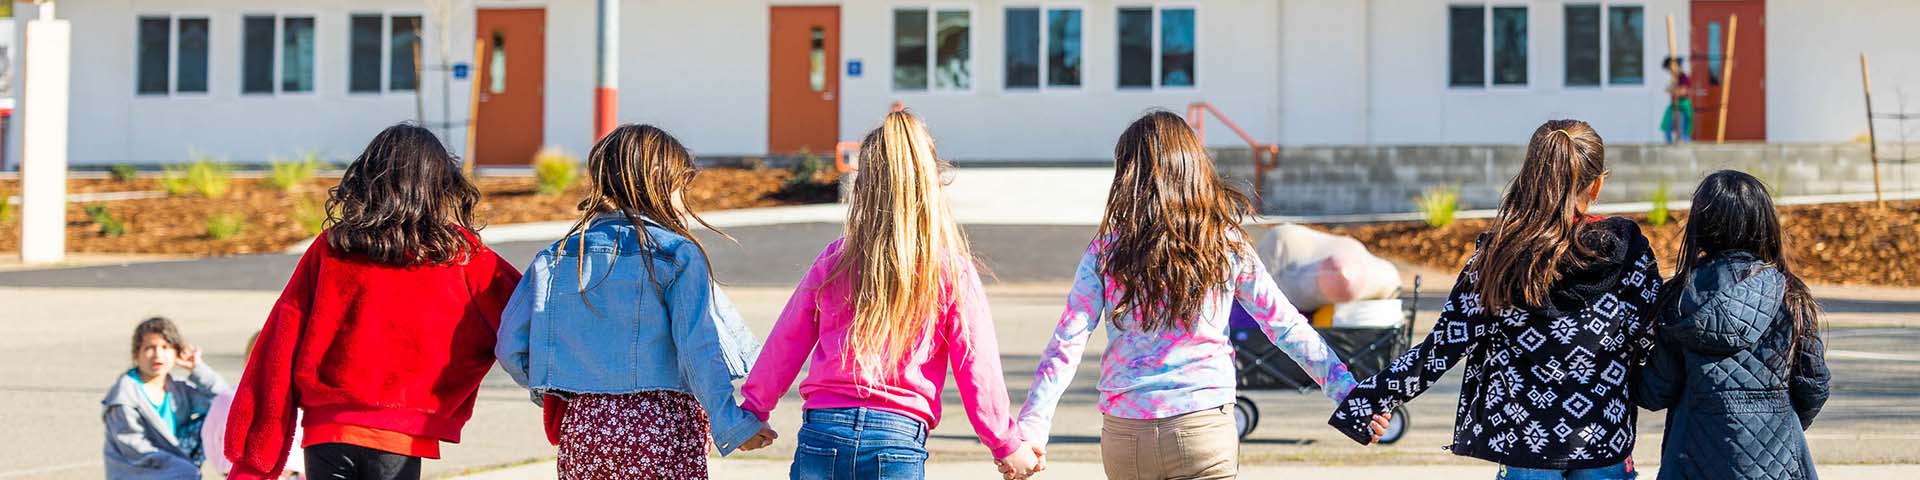 The back of students holding hands at Metteer School.